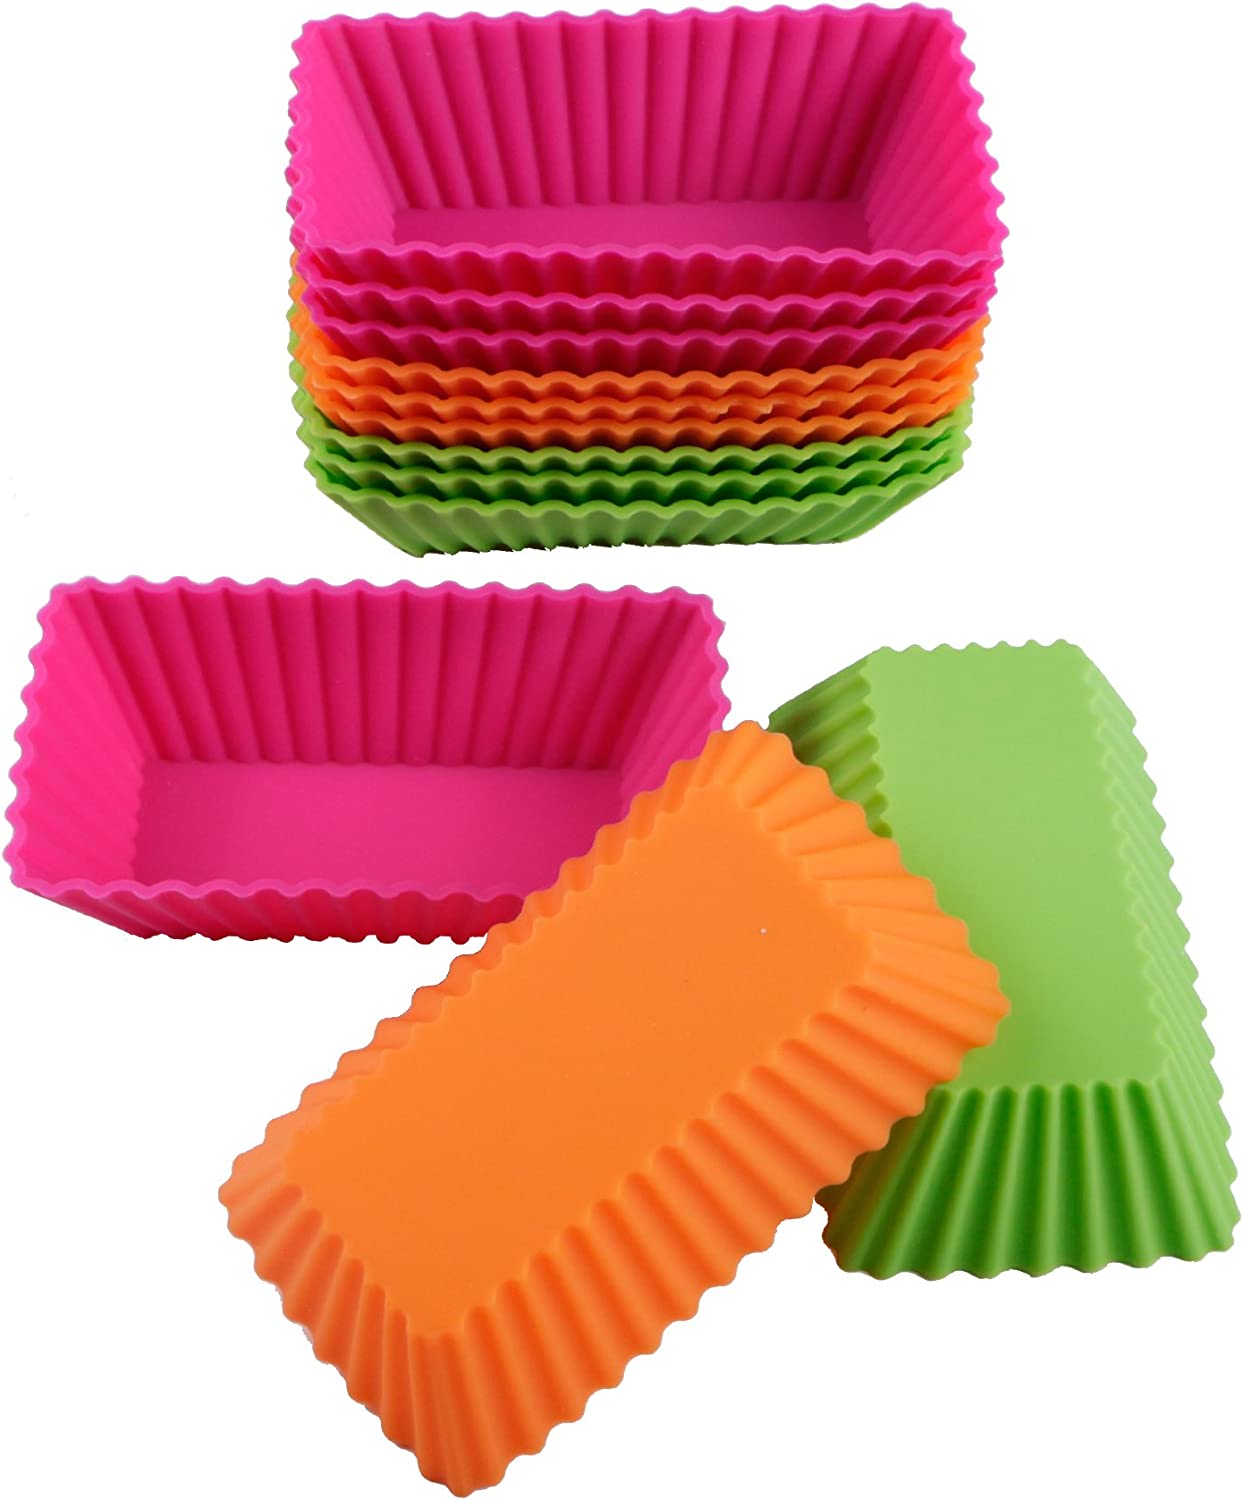 Webake rectangular 4.3 Inch brownie nonstick silicone reusable mini cupcake liners,Pack of 12